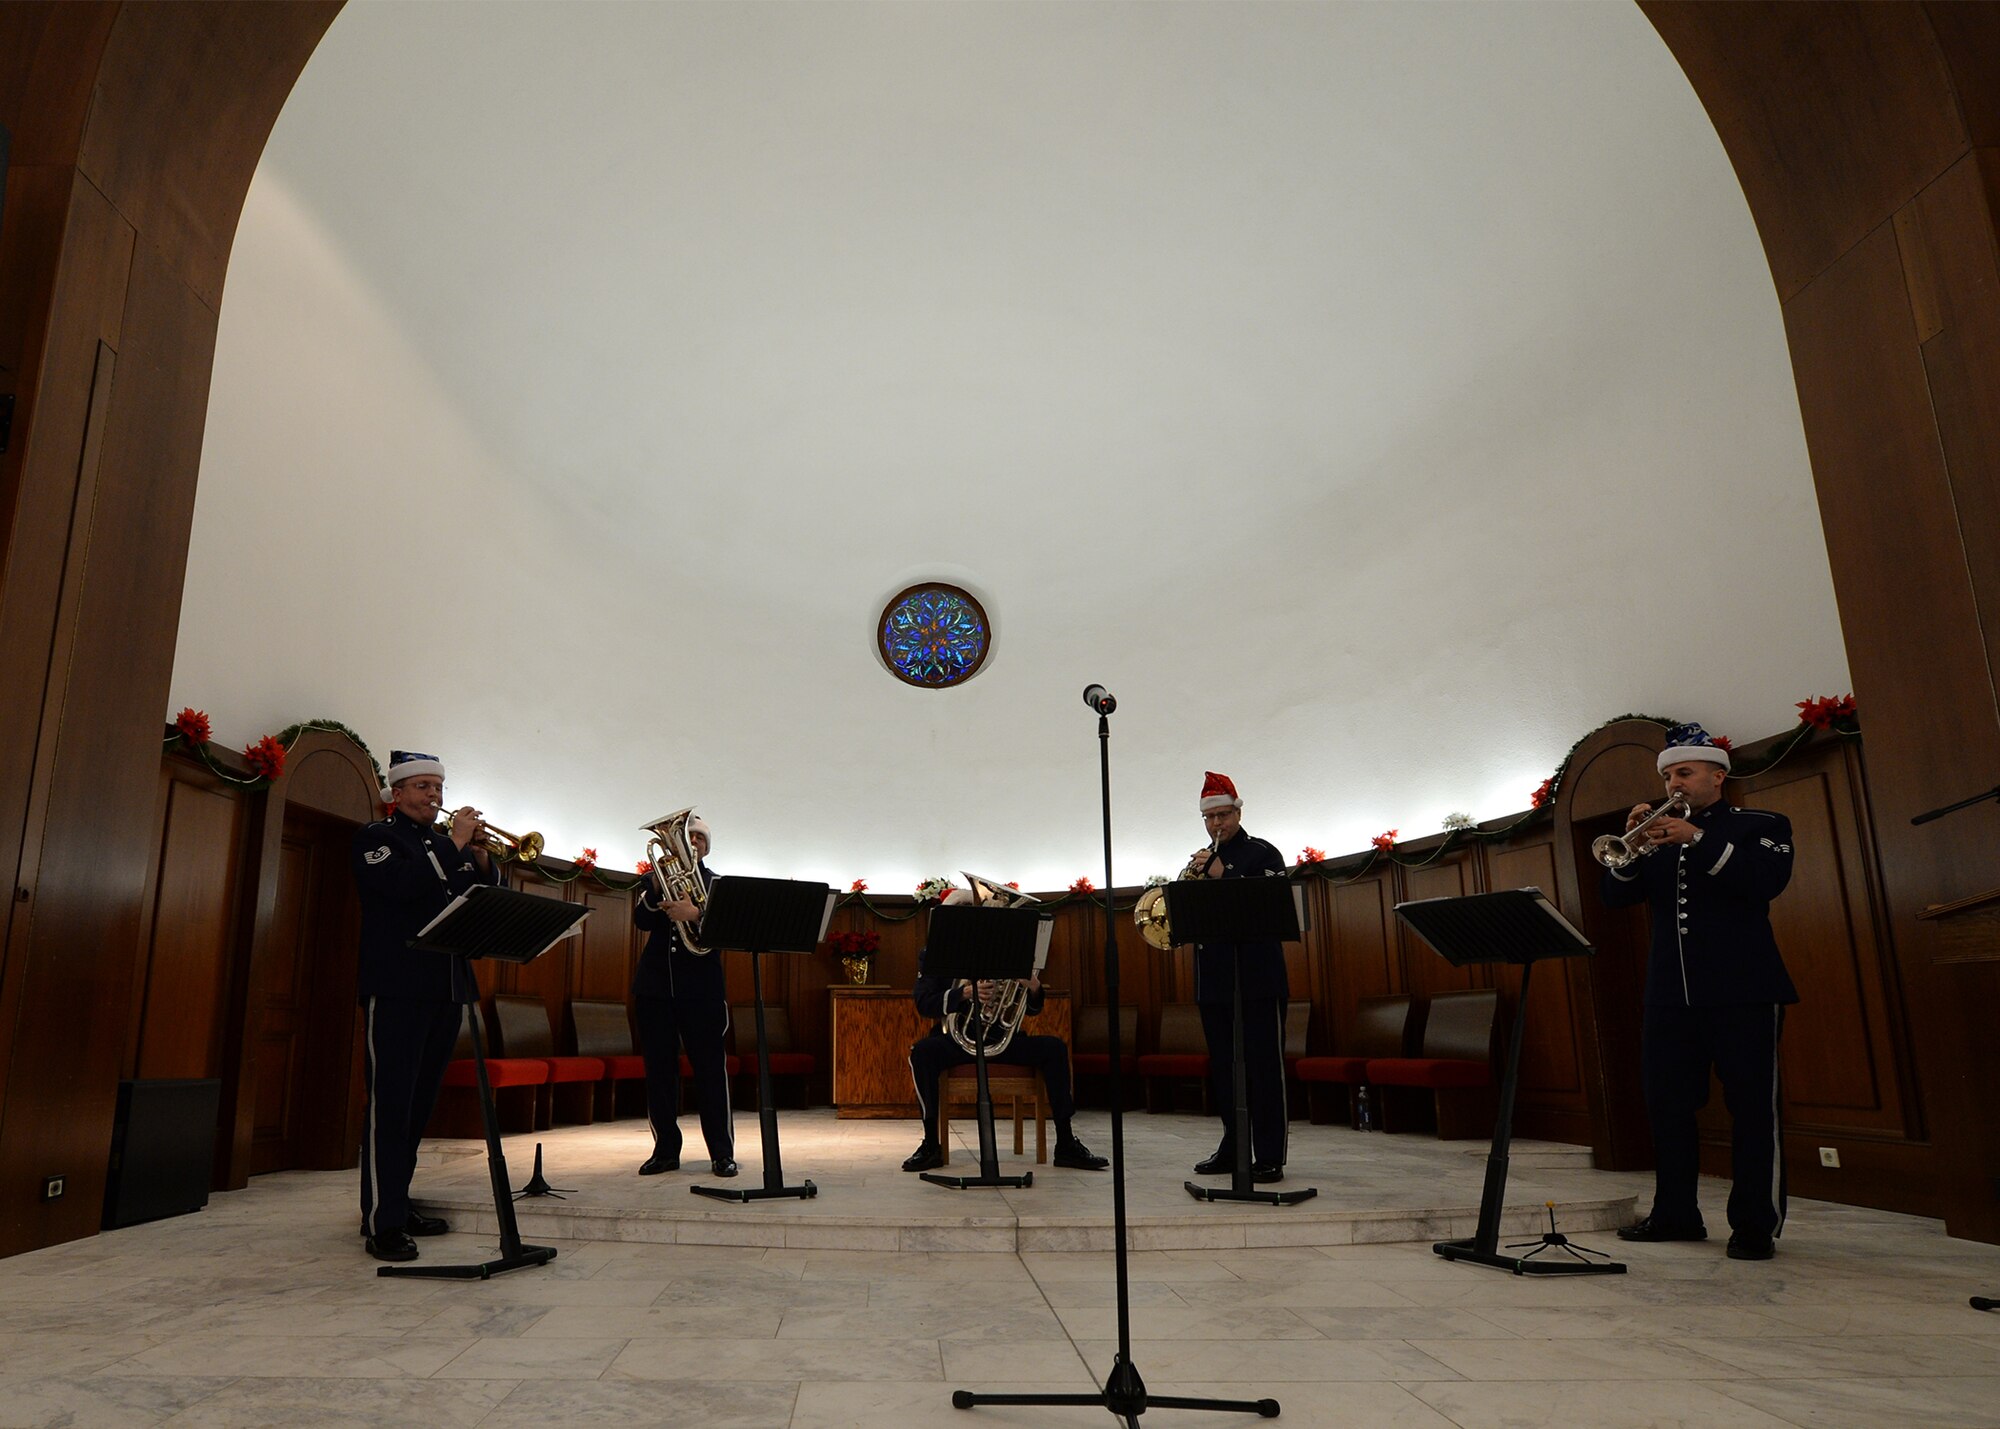 Members from Five Star Brass, a component of the United States Air Forces in Europe Band, play Christmas music at Vogelweh Military Complex, Germany, Nov. 29, 2016. Five Star Brass, played traditional Christmas music during the introduction of the ceremony as part of the program (U.S. Air Force photo by Senior Airman Jimmie D. Pike)